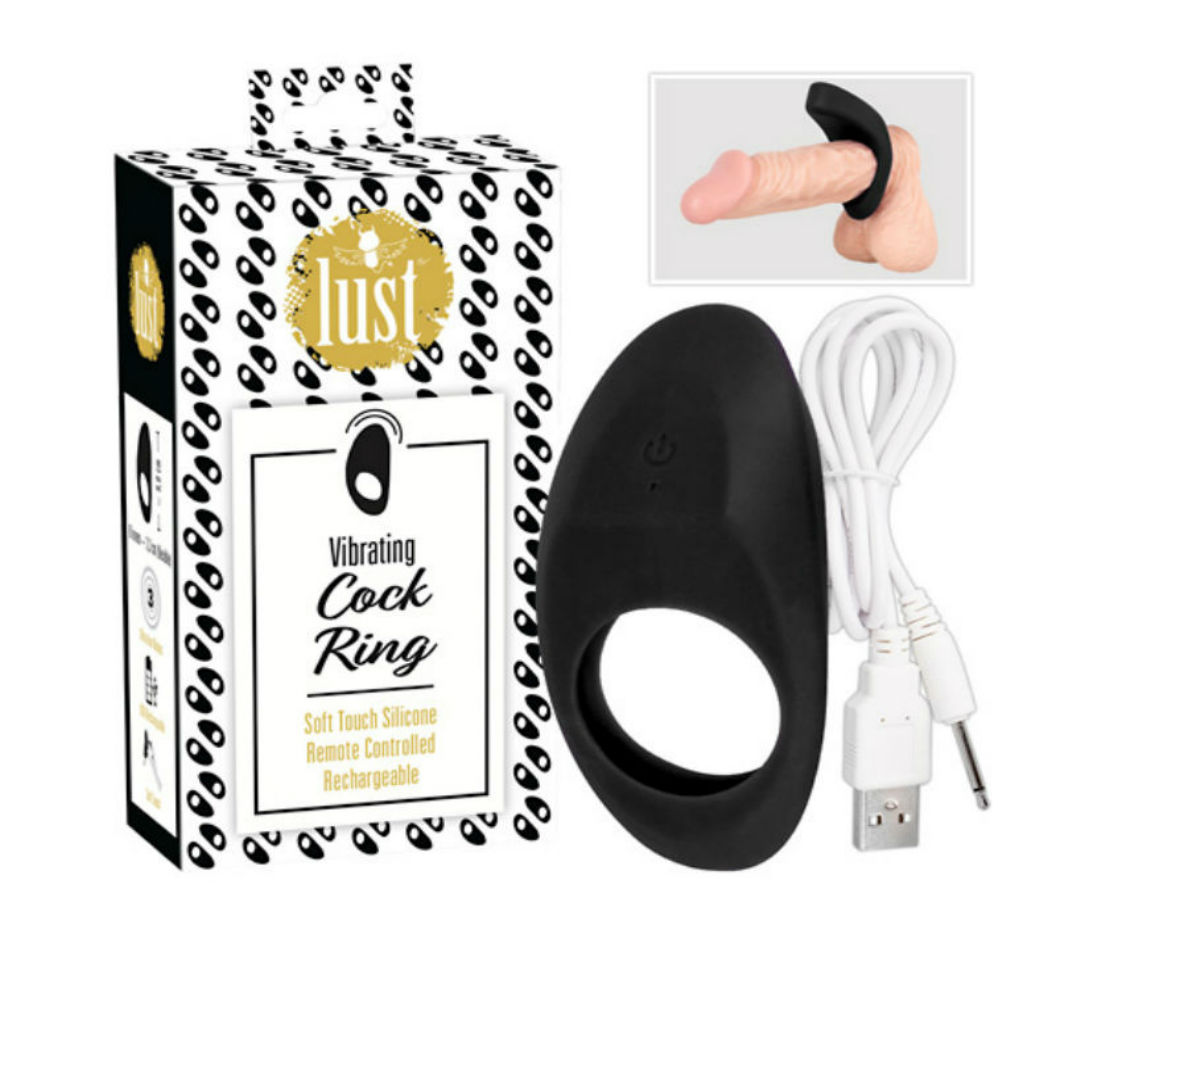 lust-vibrating-cock-ring